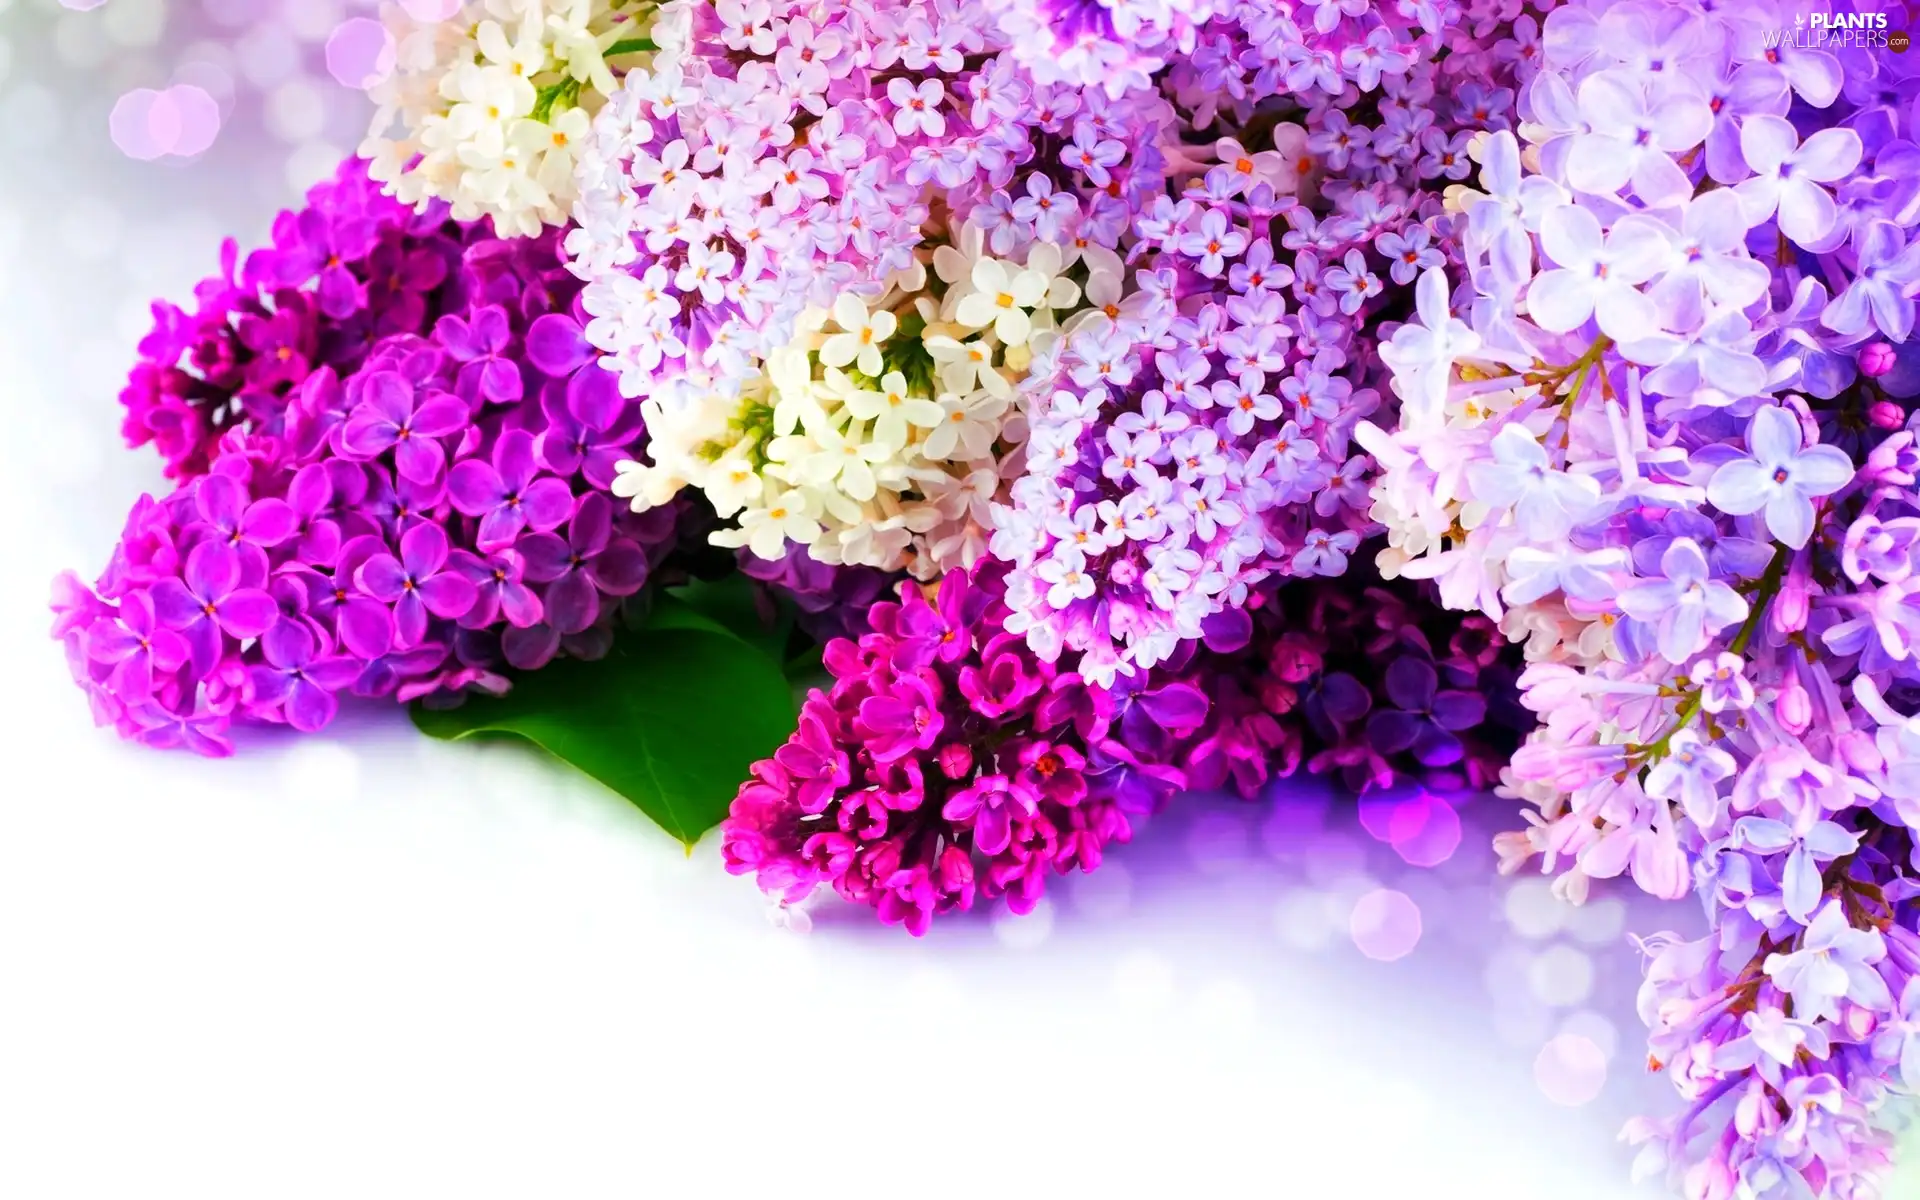 Flowers, lilac